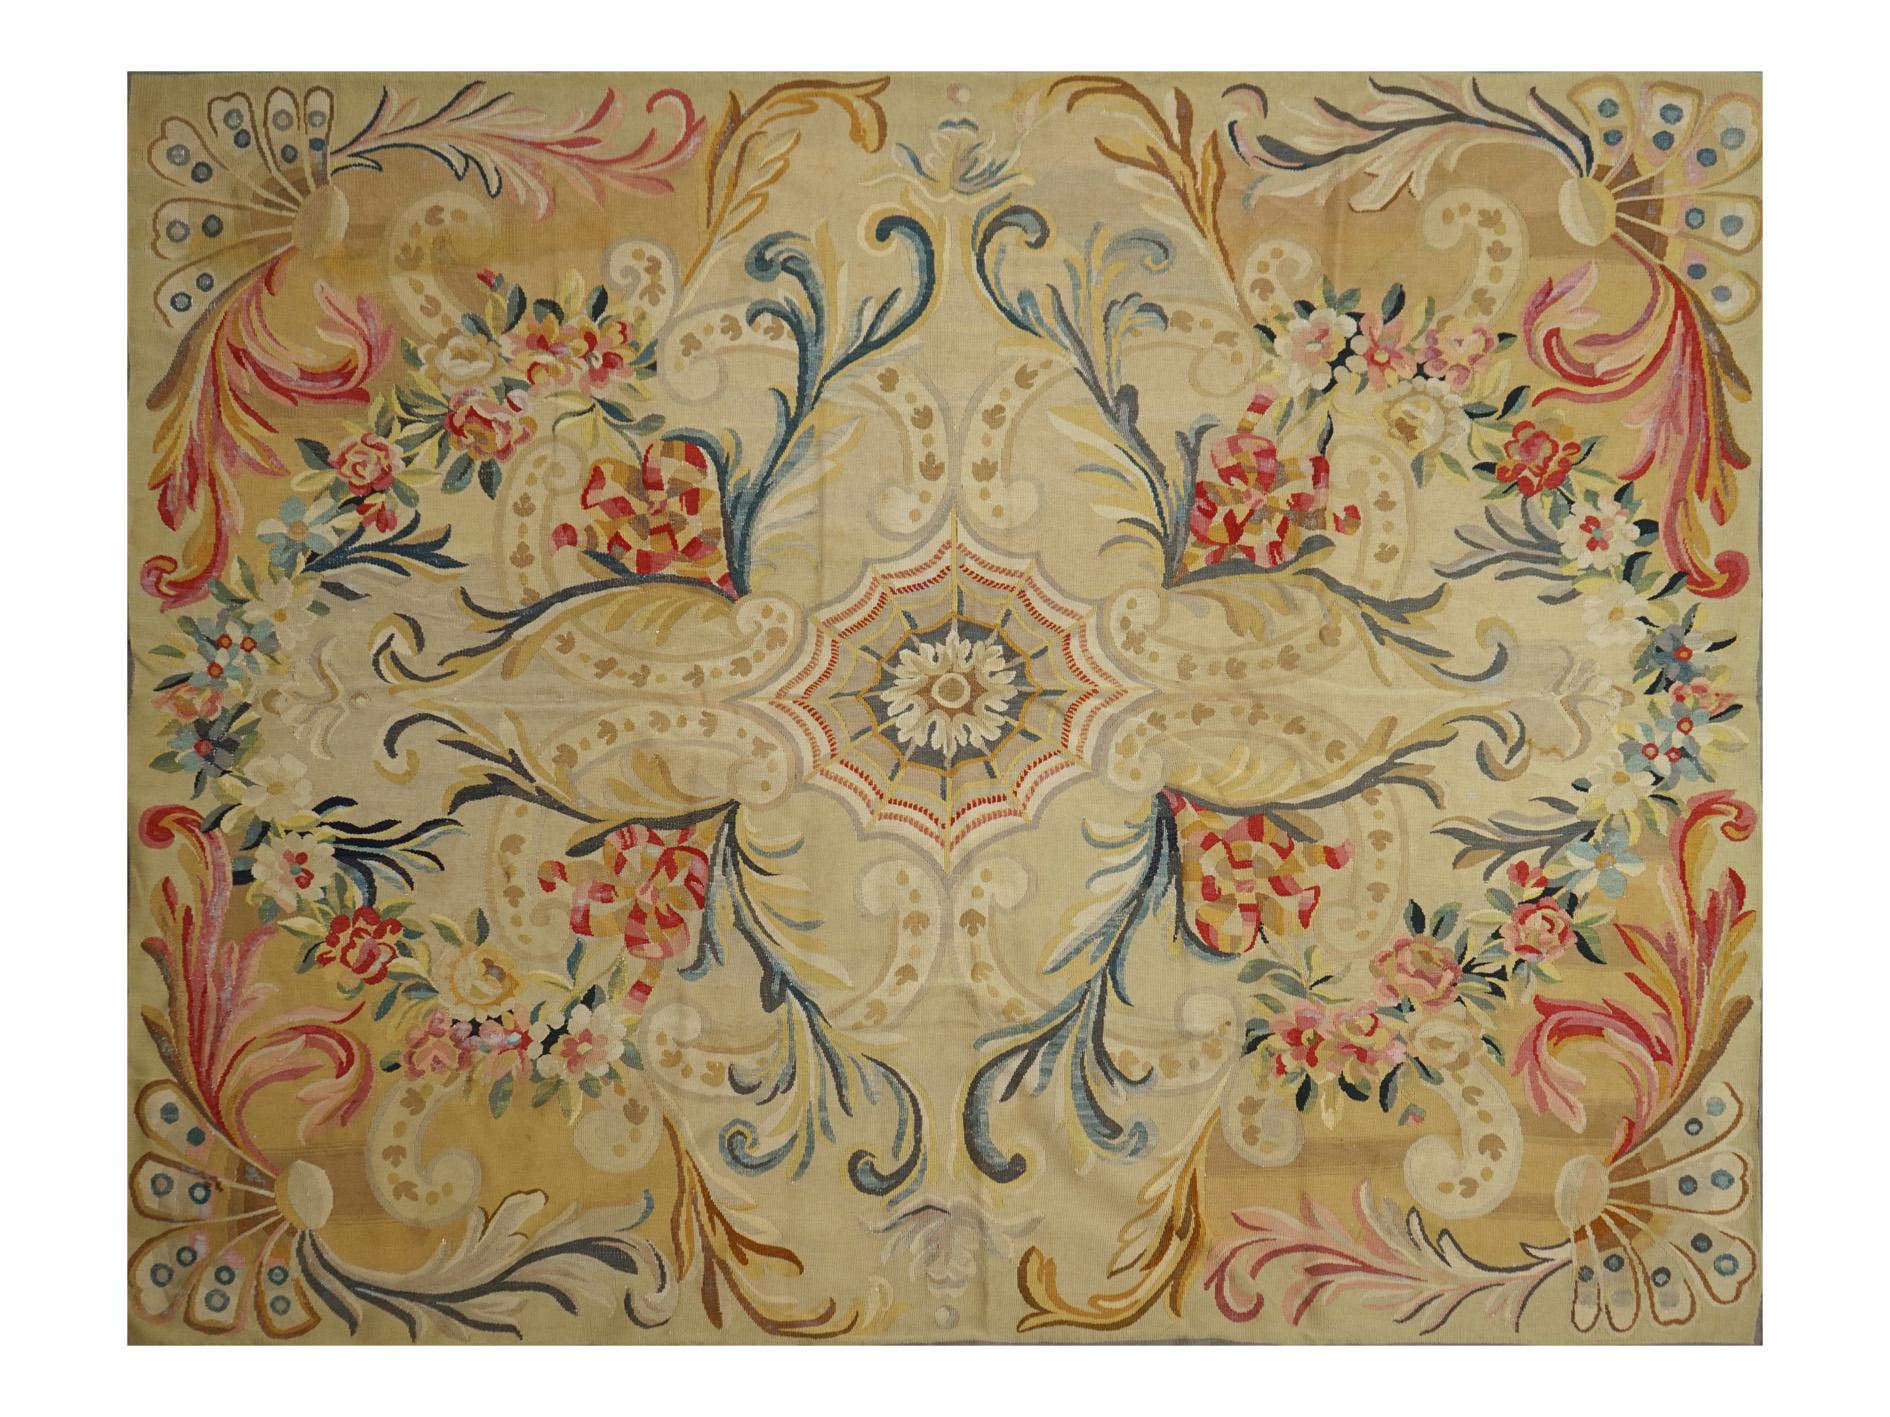 End of 19th century handwoven antique Aubusson rug
Material: wool
Dimensions: 310 x 350 cm; 10.2 x 11.5 ft

We have an important collection of Aubusson rugs from the 18th to the 20th centuries. The style developed in Aubusson is recognized today